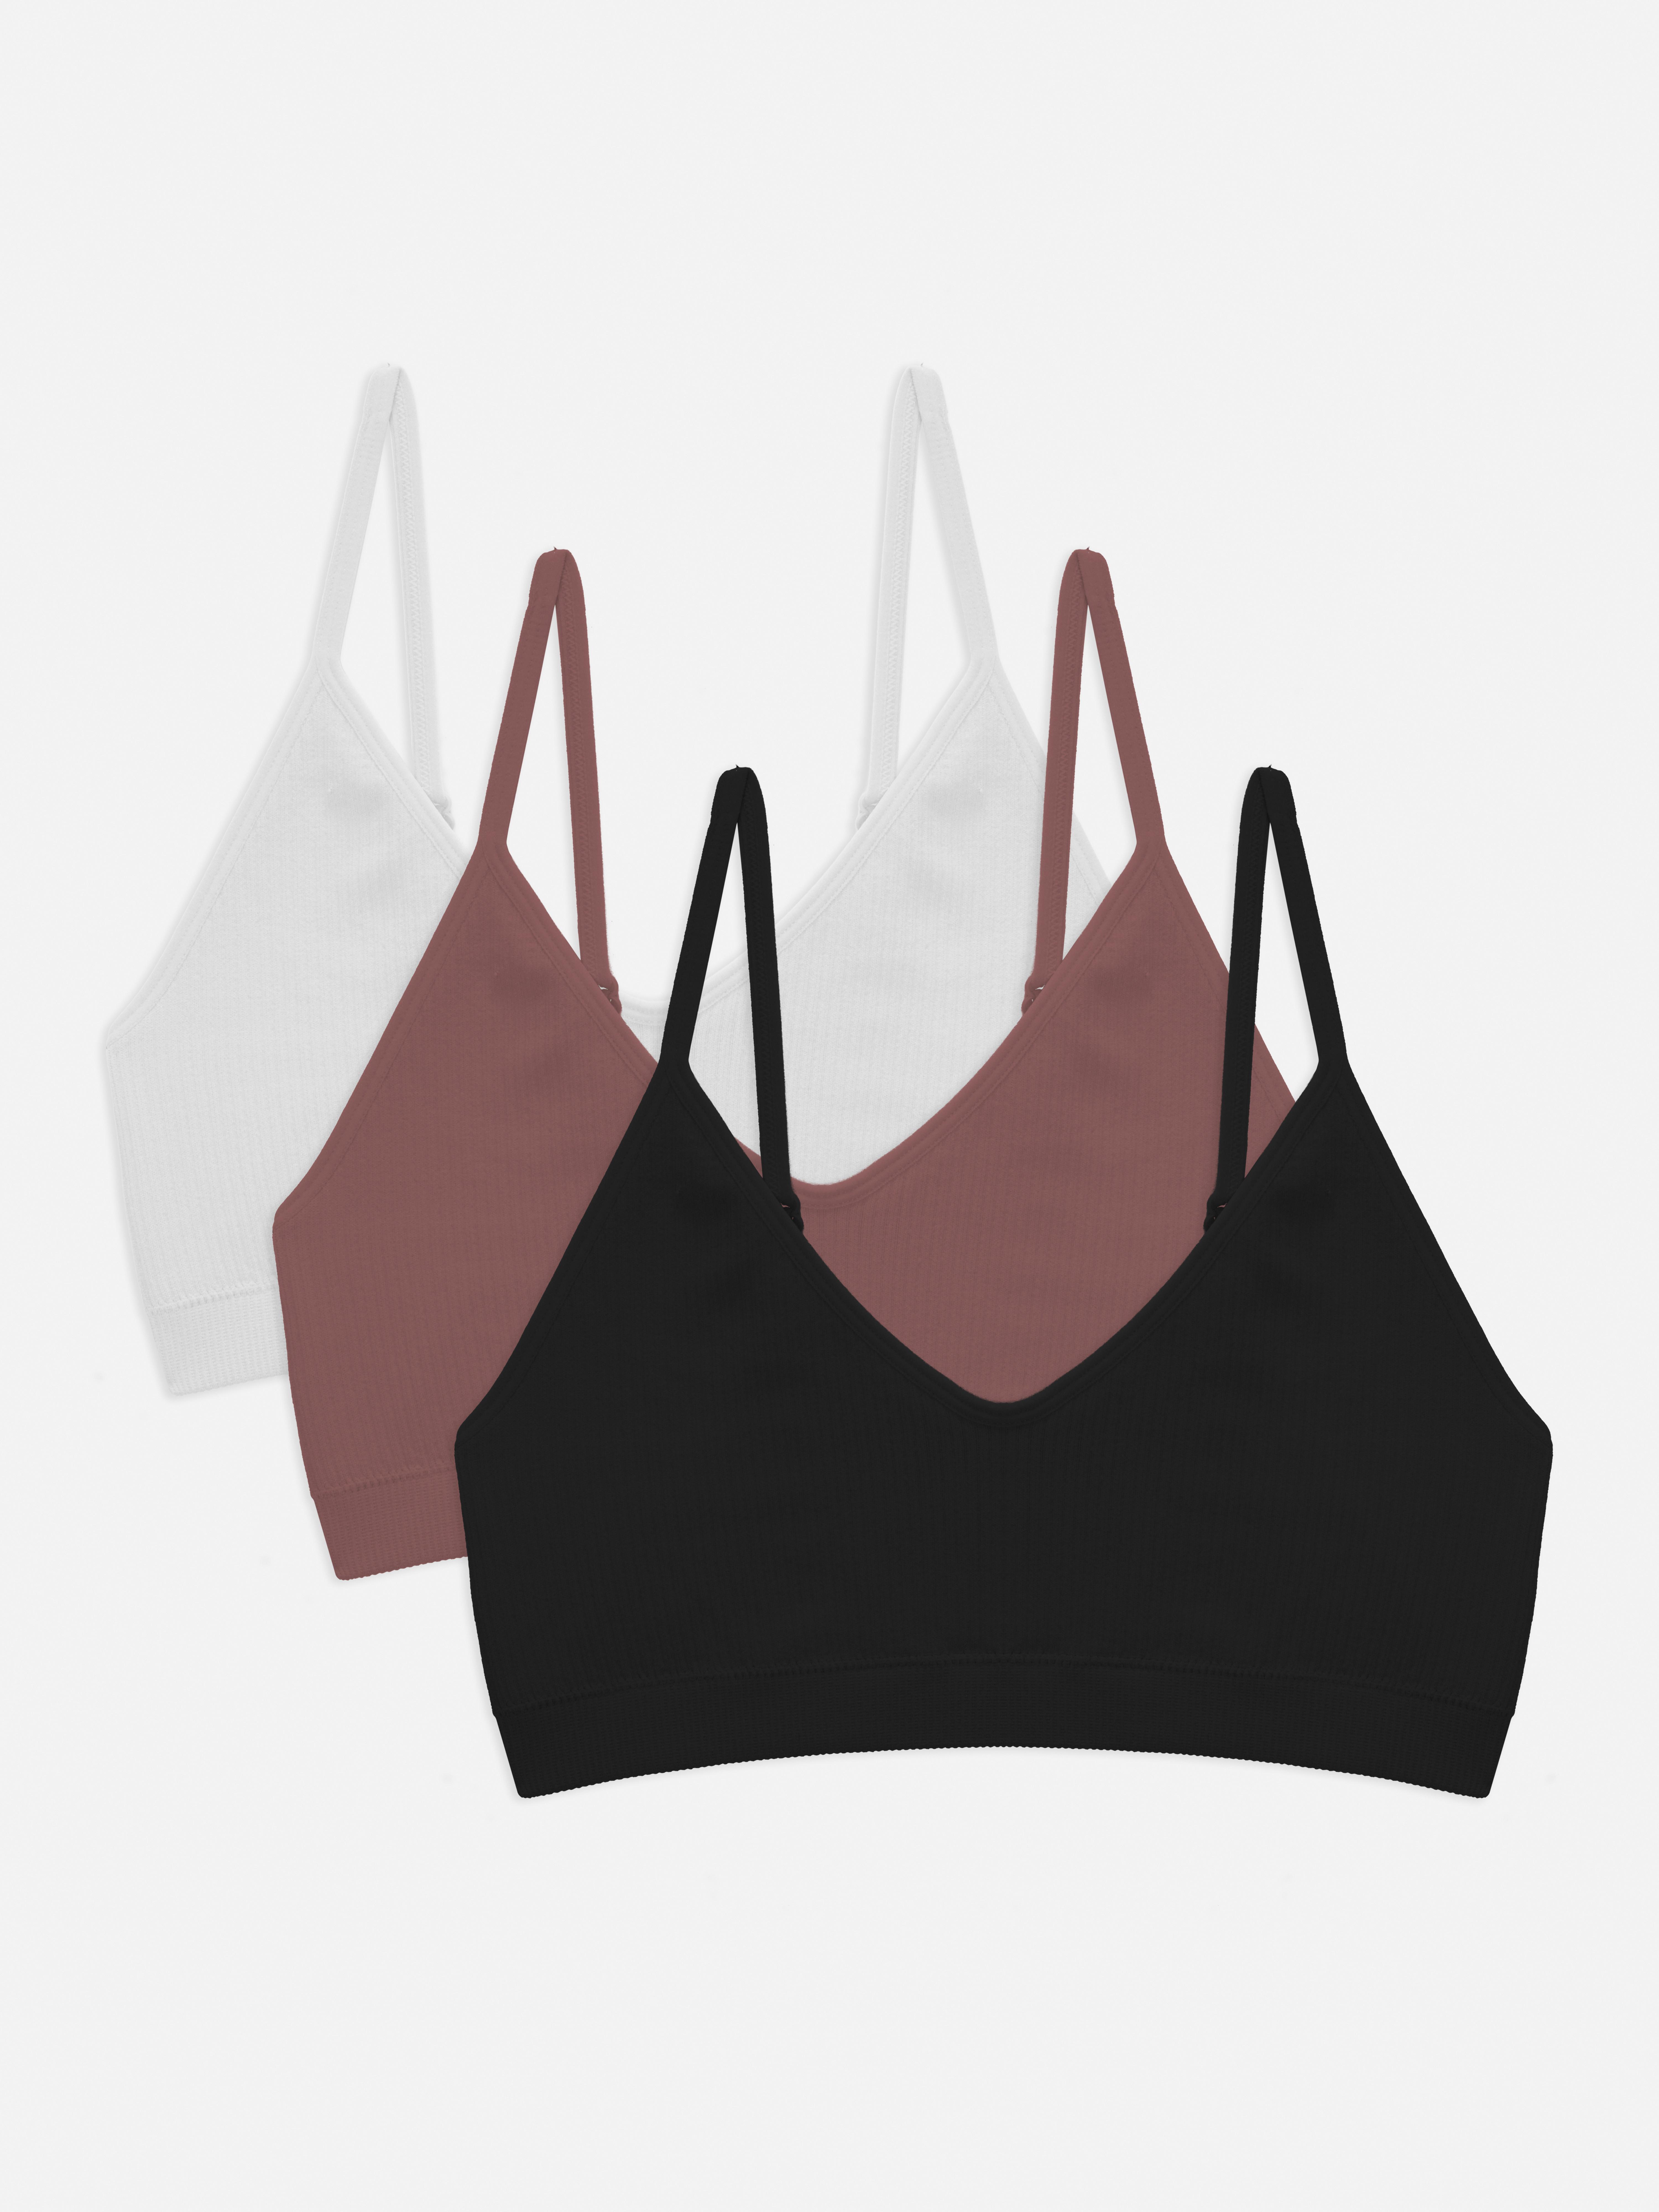 Primark lovers are raving over their seamless, wireless bra and thong sets  that only cost £6